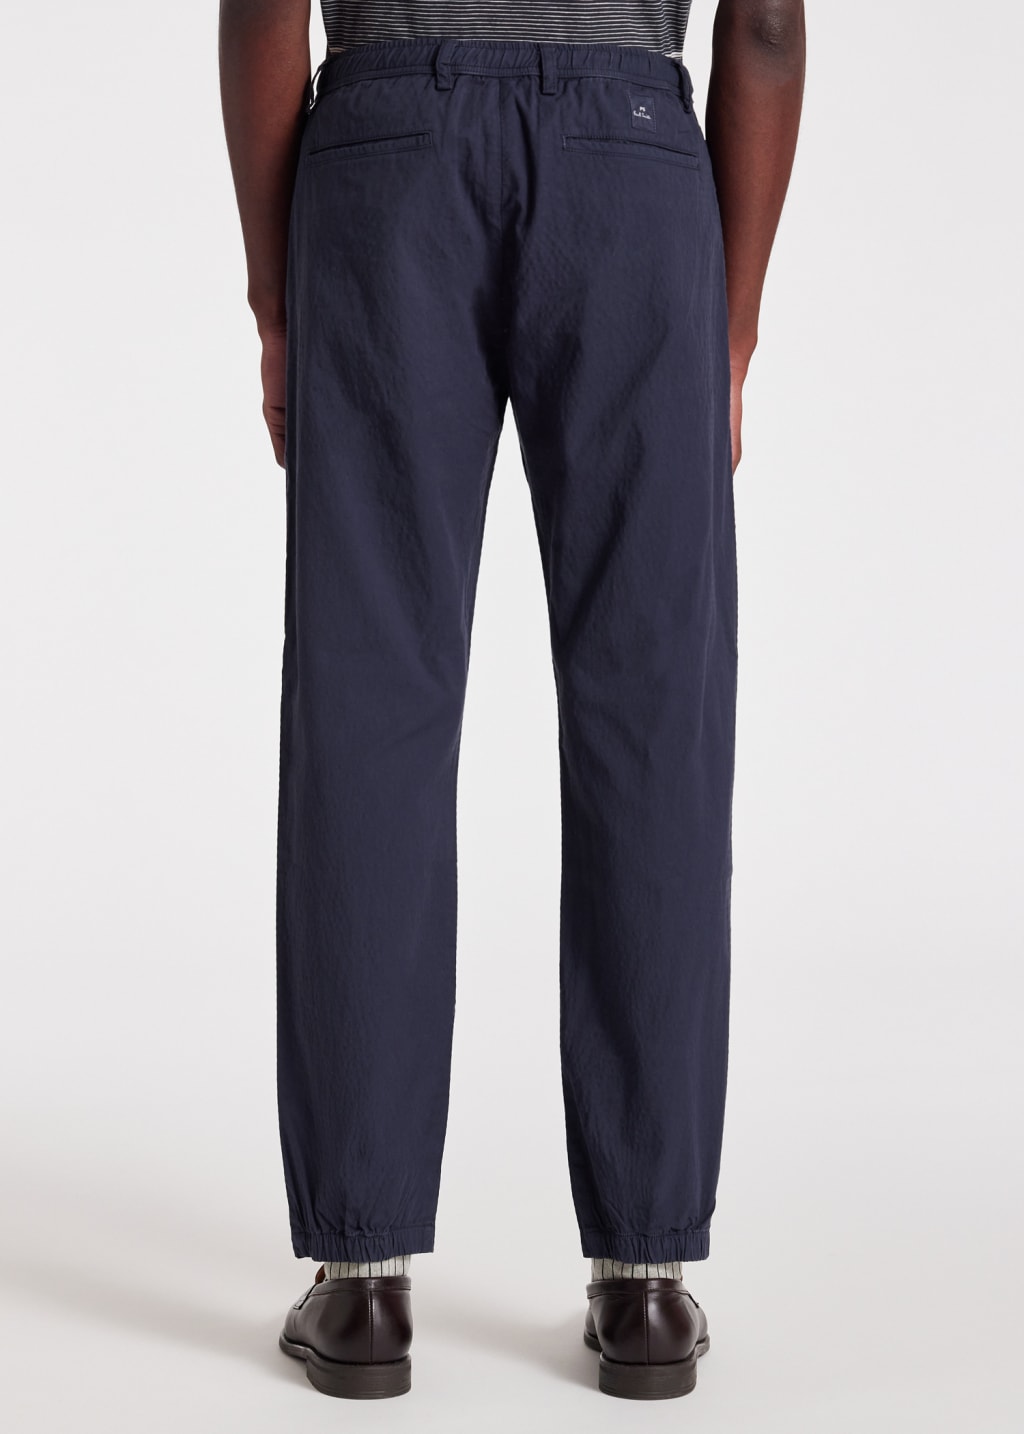 Model View - Navy Organic Cotton-Stretch Elasticated Chinos Paul Smith